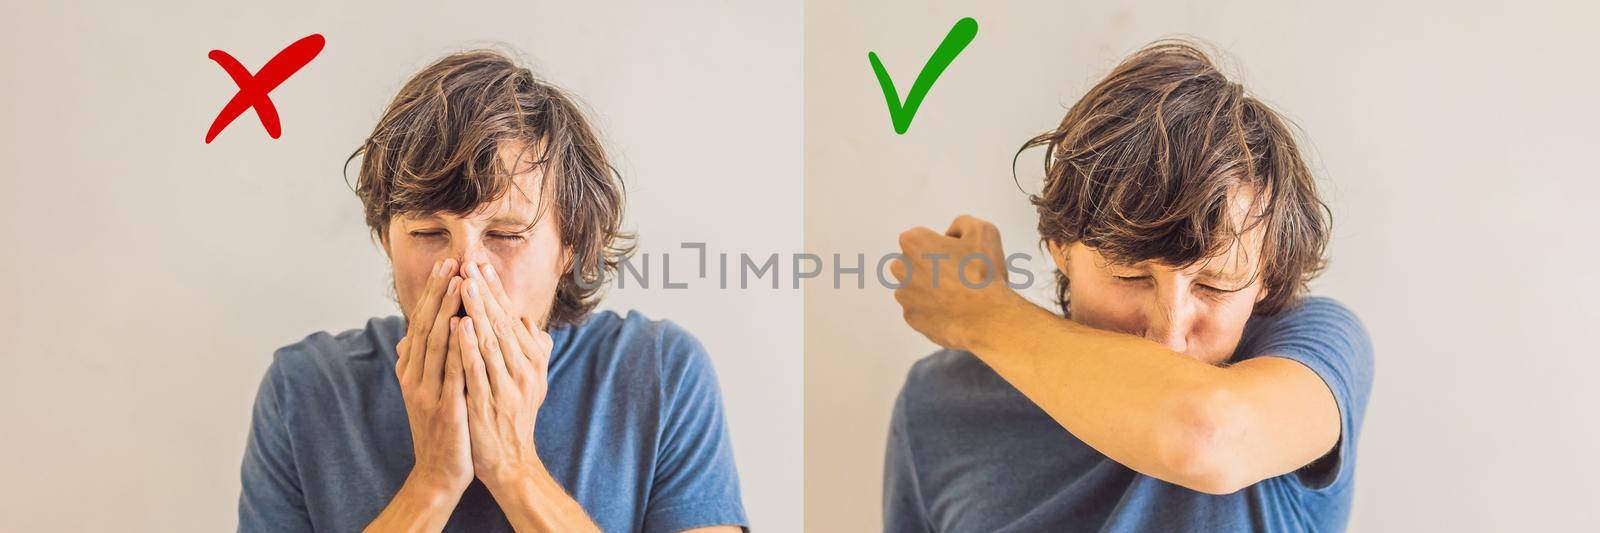 Comparison between wrong and right way to sneeze to prevent virus infection. Caucasian woman sneezing, coughing into her arm or elbow to prevent spread Covid-19,Coronavirus BANNER, LONG FORMAT by galitskaya